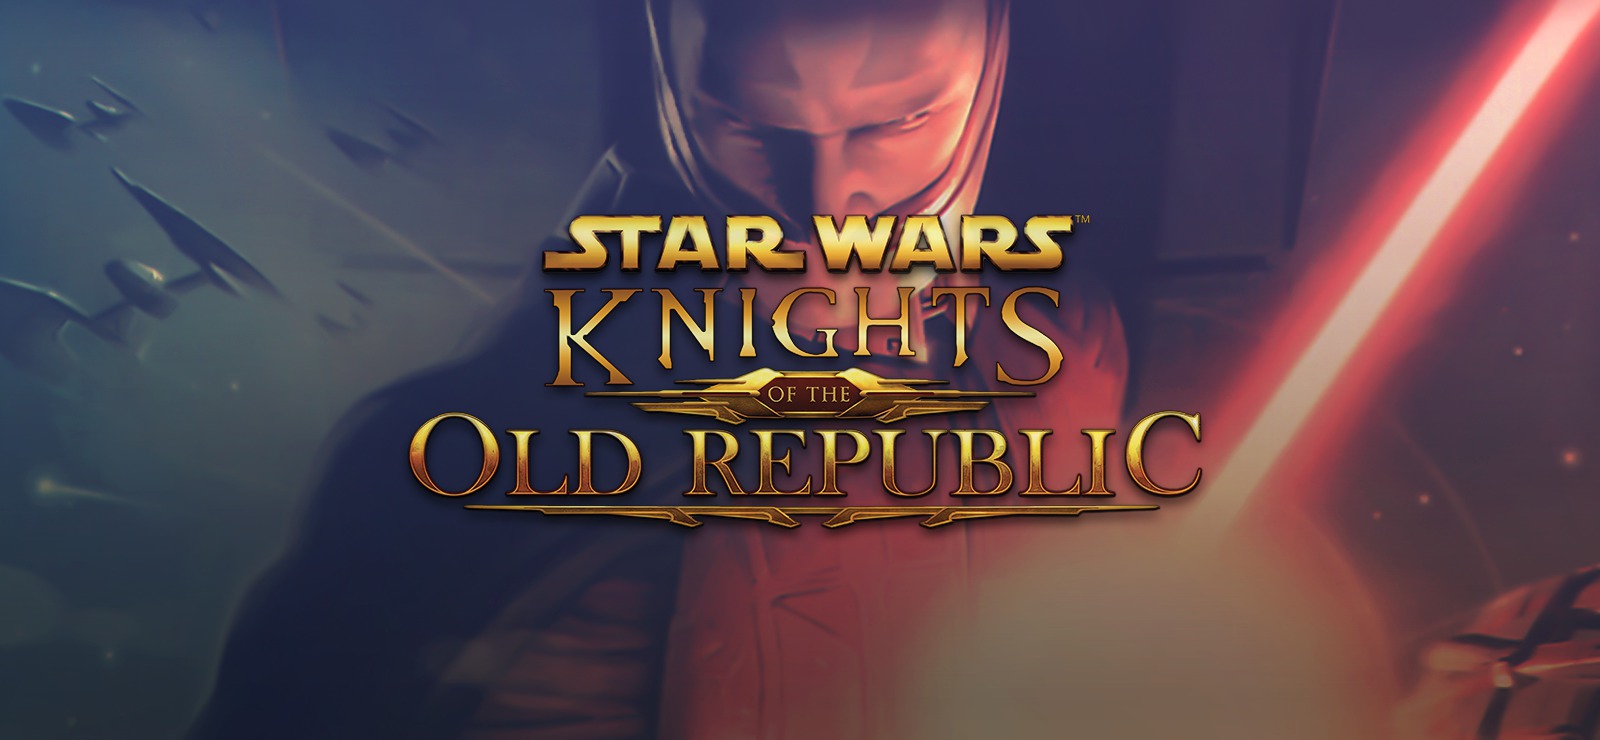 An interview with chris avellone, video game designer for ‘star wars: knights of the old republic’